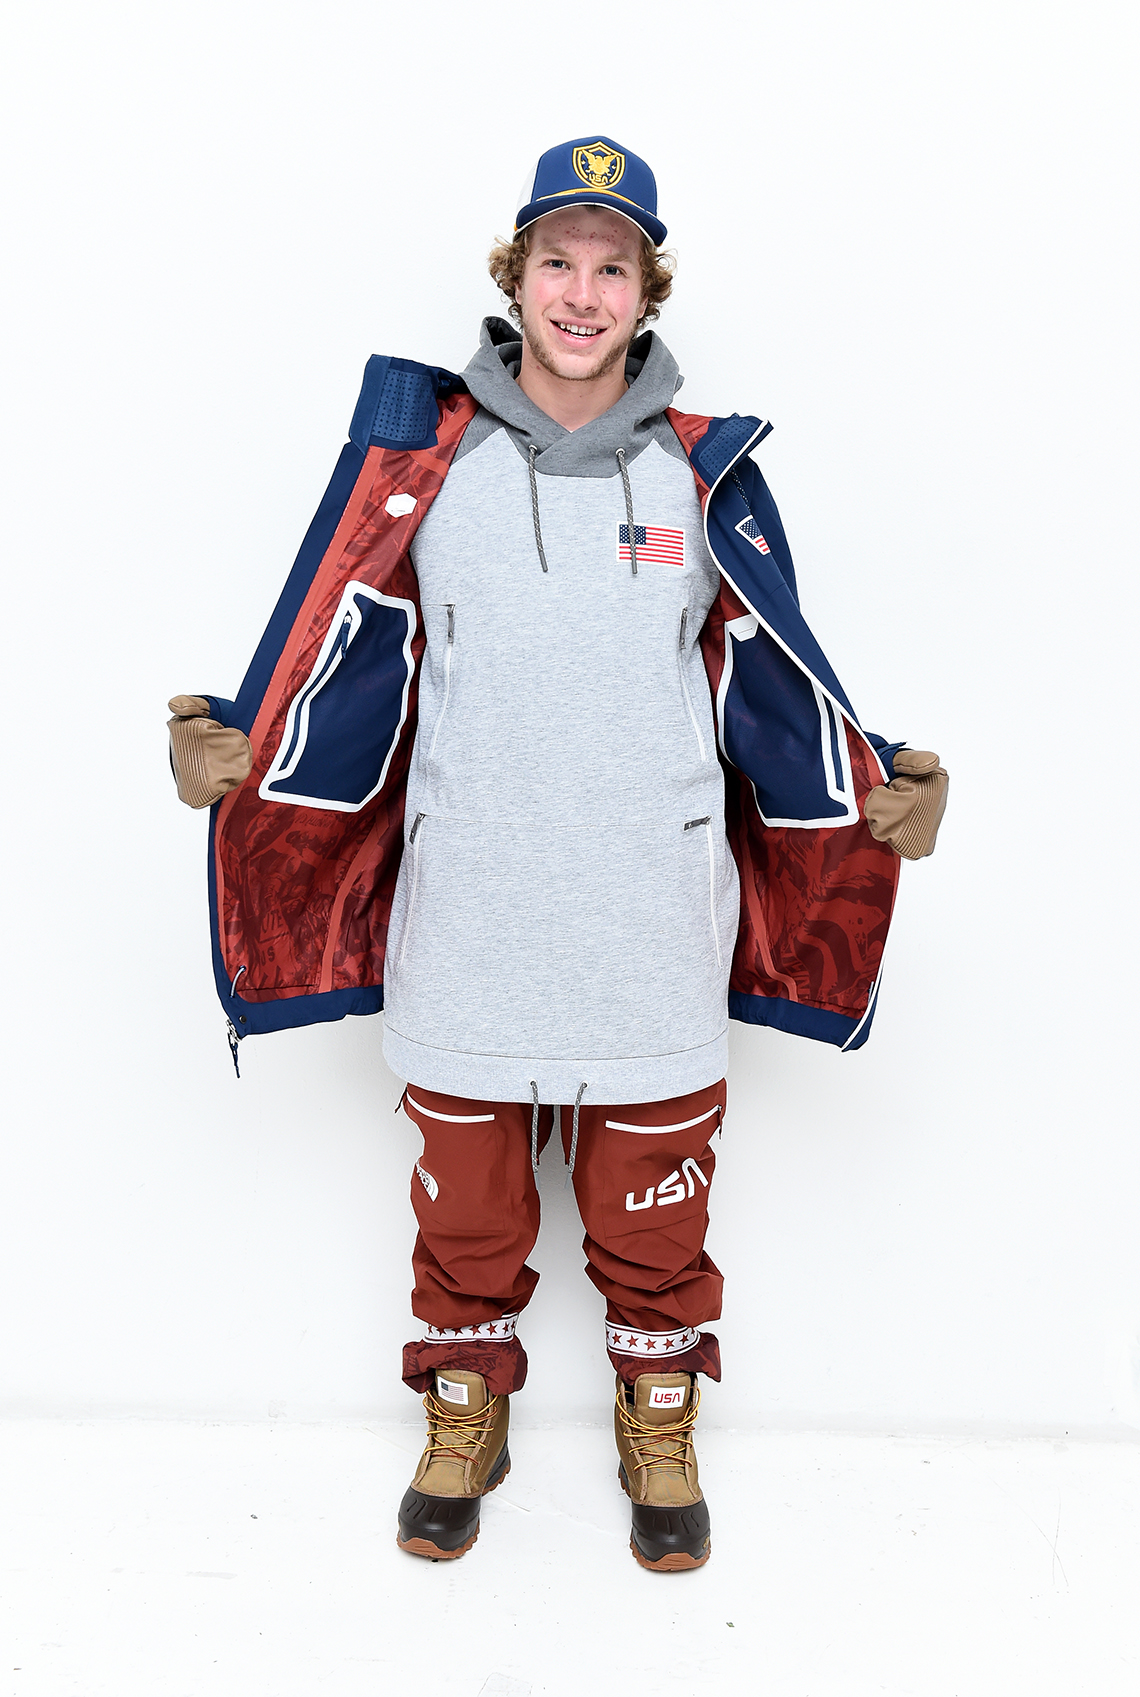 TNF's fully waterproof hoodie is one of the feature additions to the US Freeskiing collection.